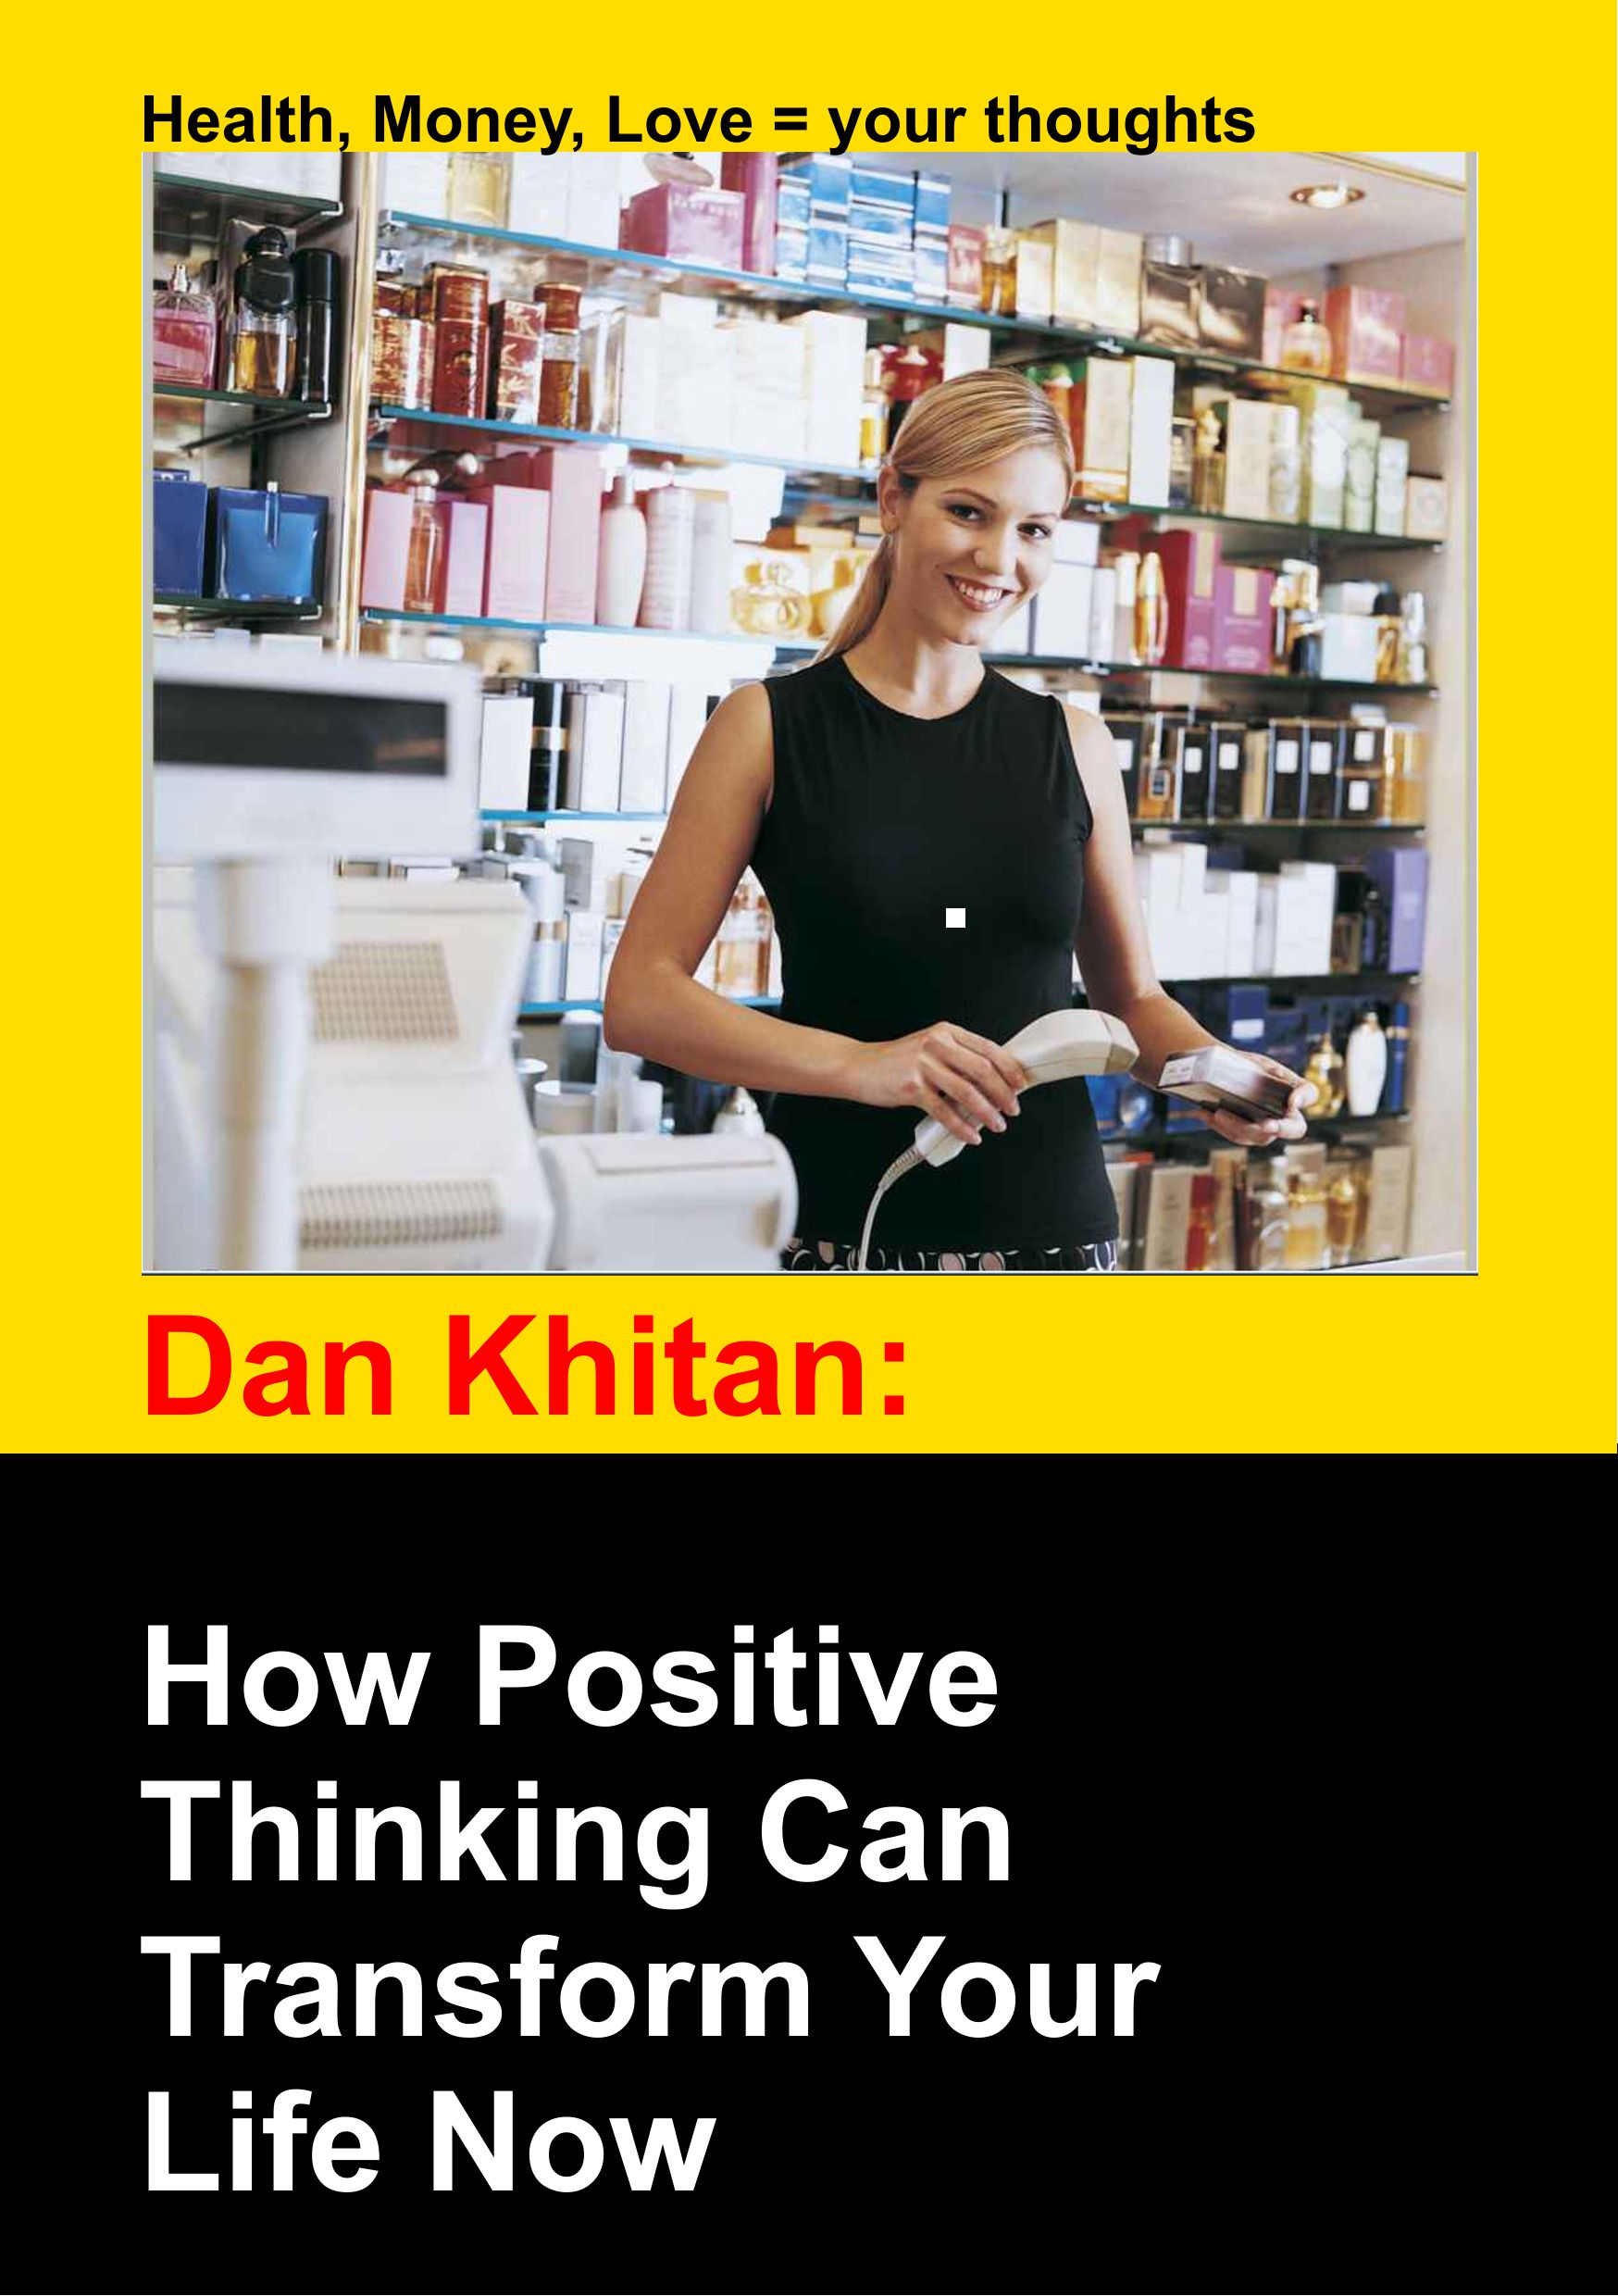 FREE: How Positive Thinking Can Transform Your Life Now by Dan Khitan